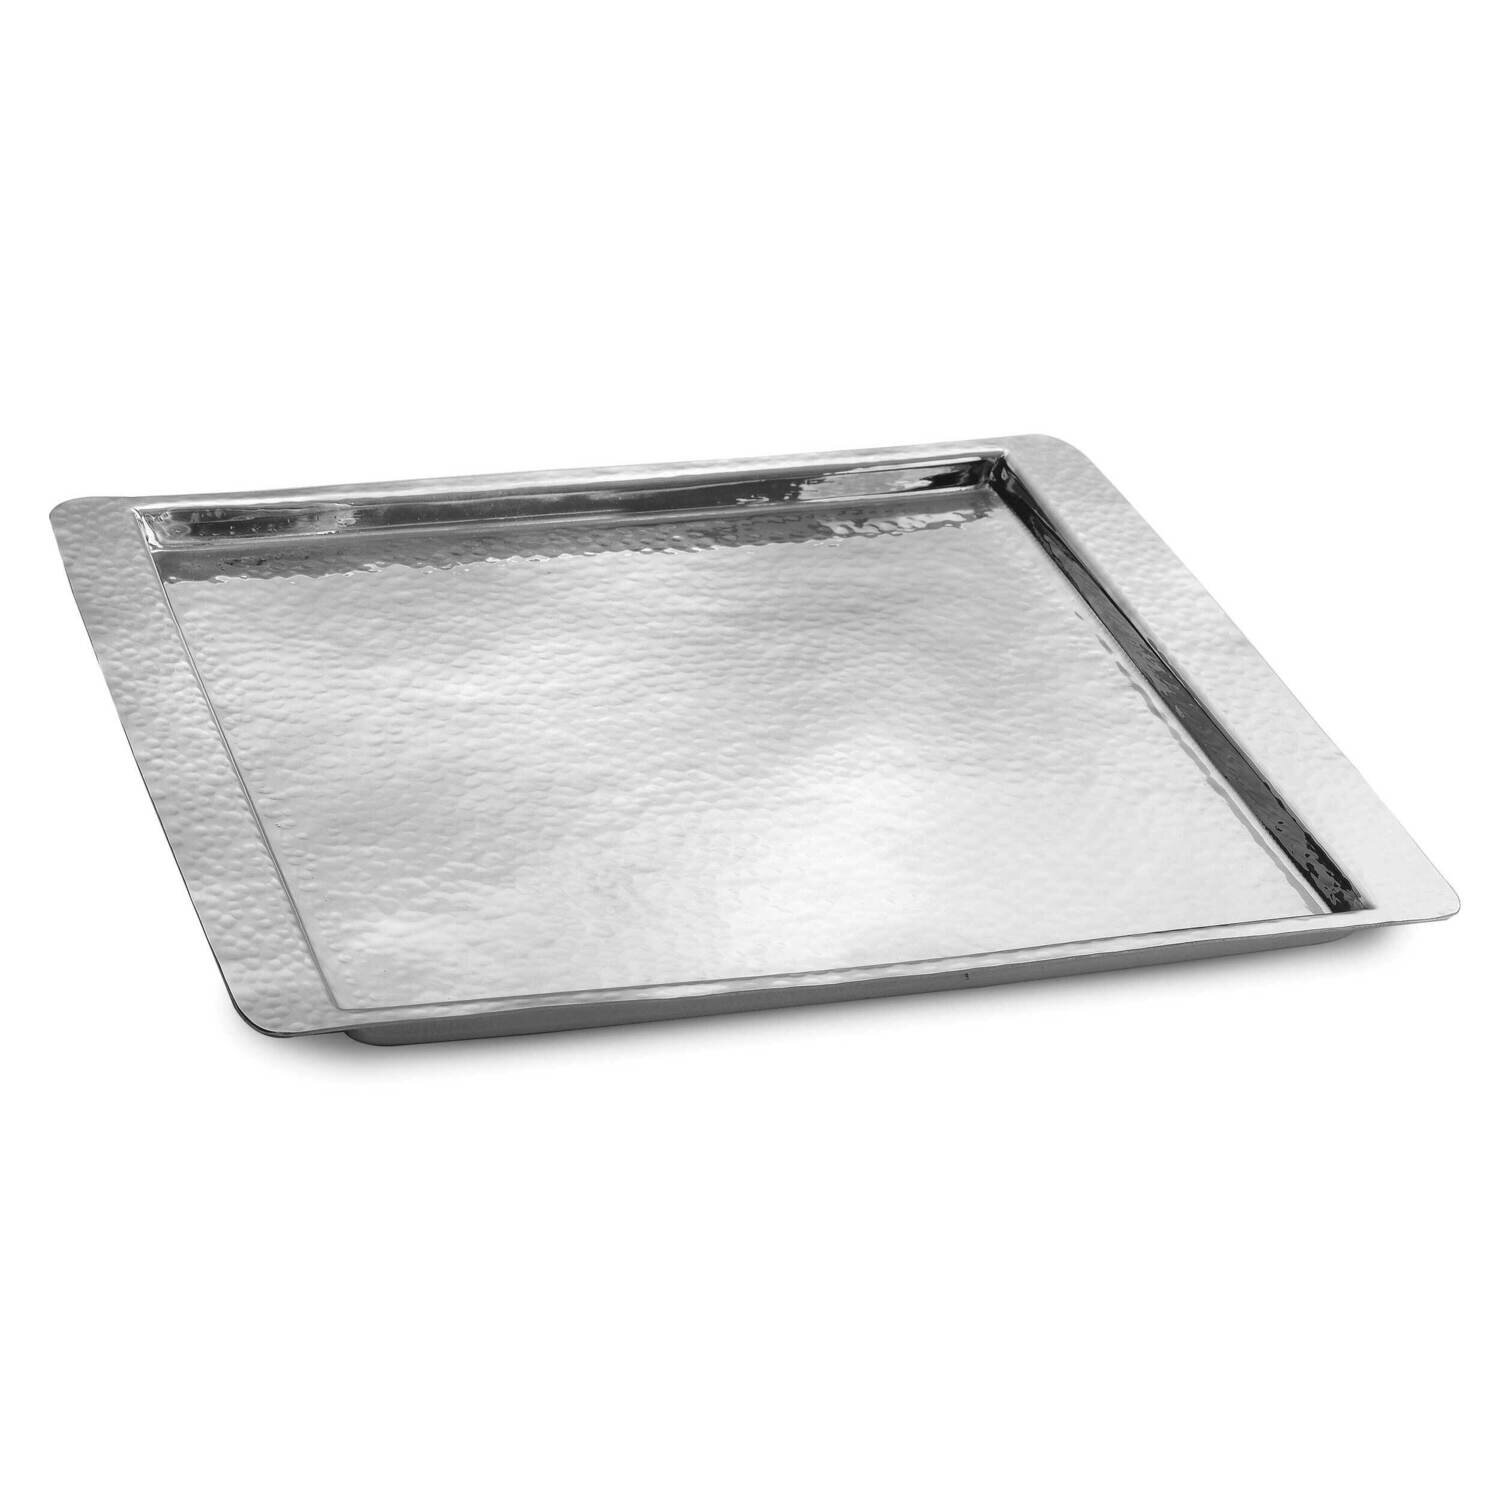 Hammered Stainless Steel Medium Tray GM22341